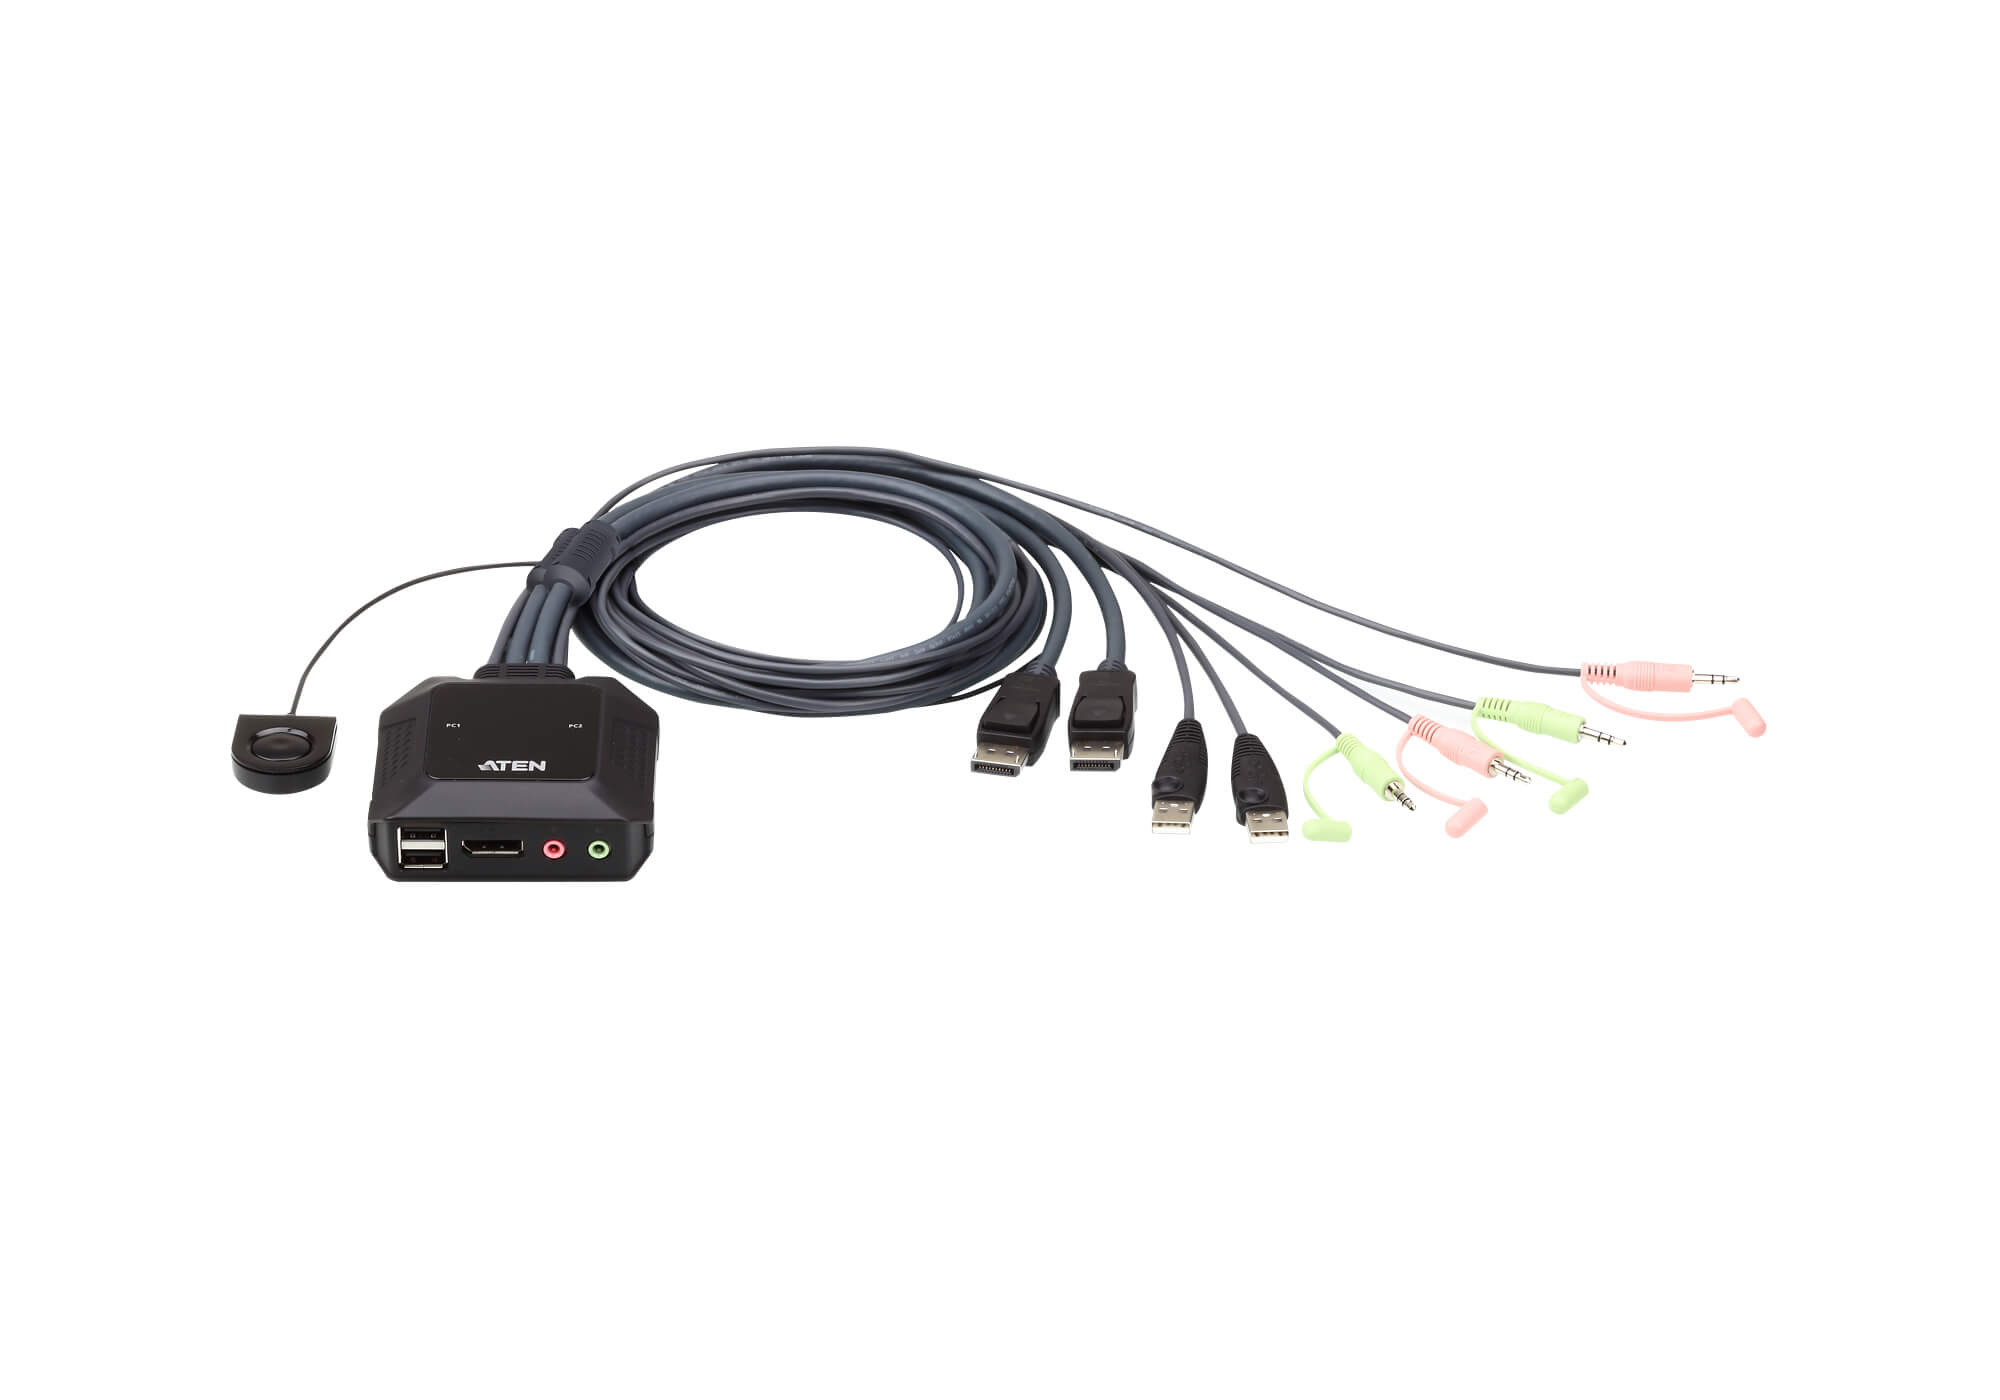 KVM Switches/Aten: Aten, Compact, KVM, Switch, 2, Port, Single, Display, Display, Port, w/, Audio, Remote, Port, Selector, USB, Hot-Plugging, 